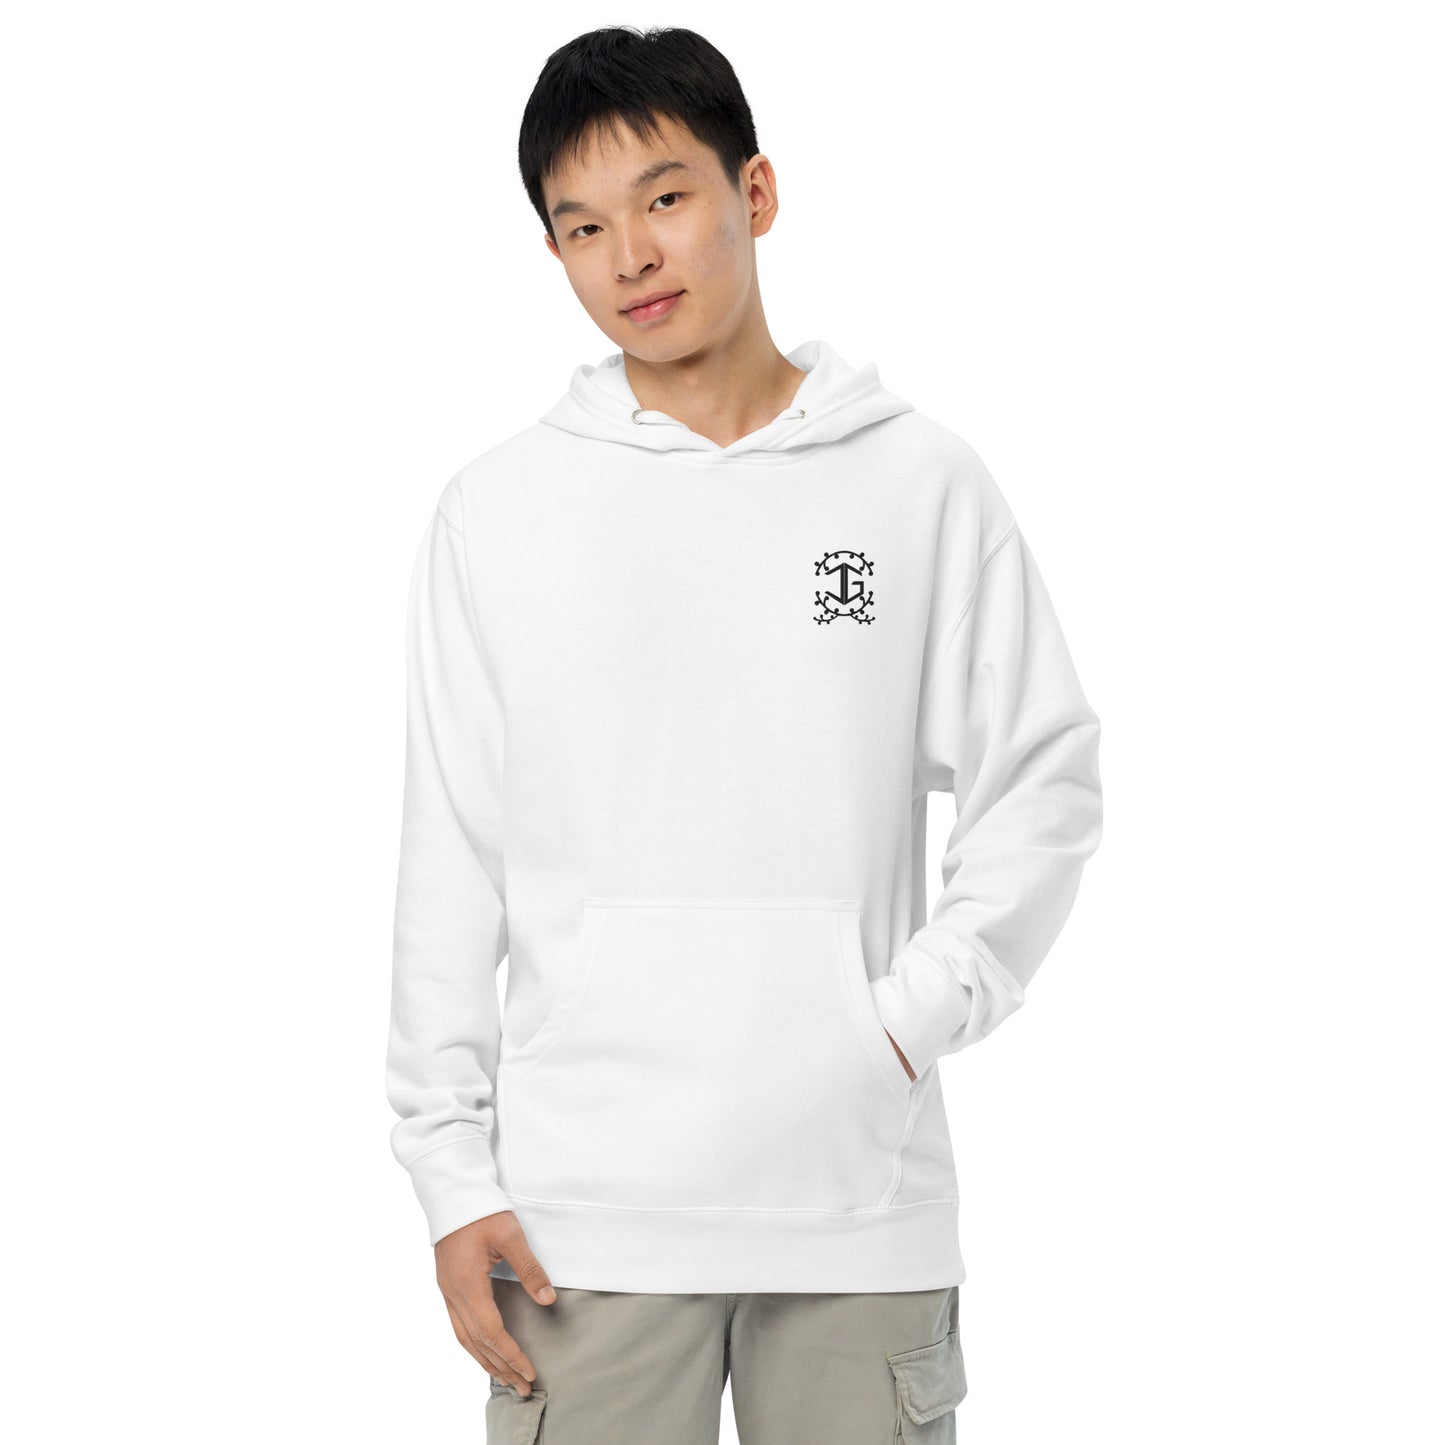 Common Ground Middle Weight Hoodie - Light